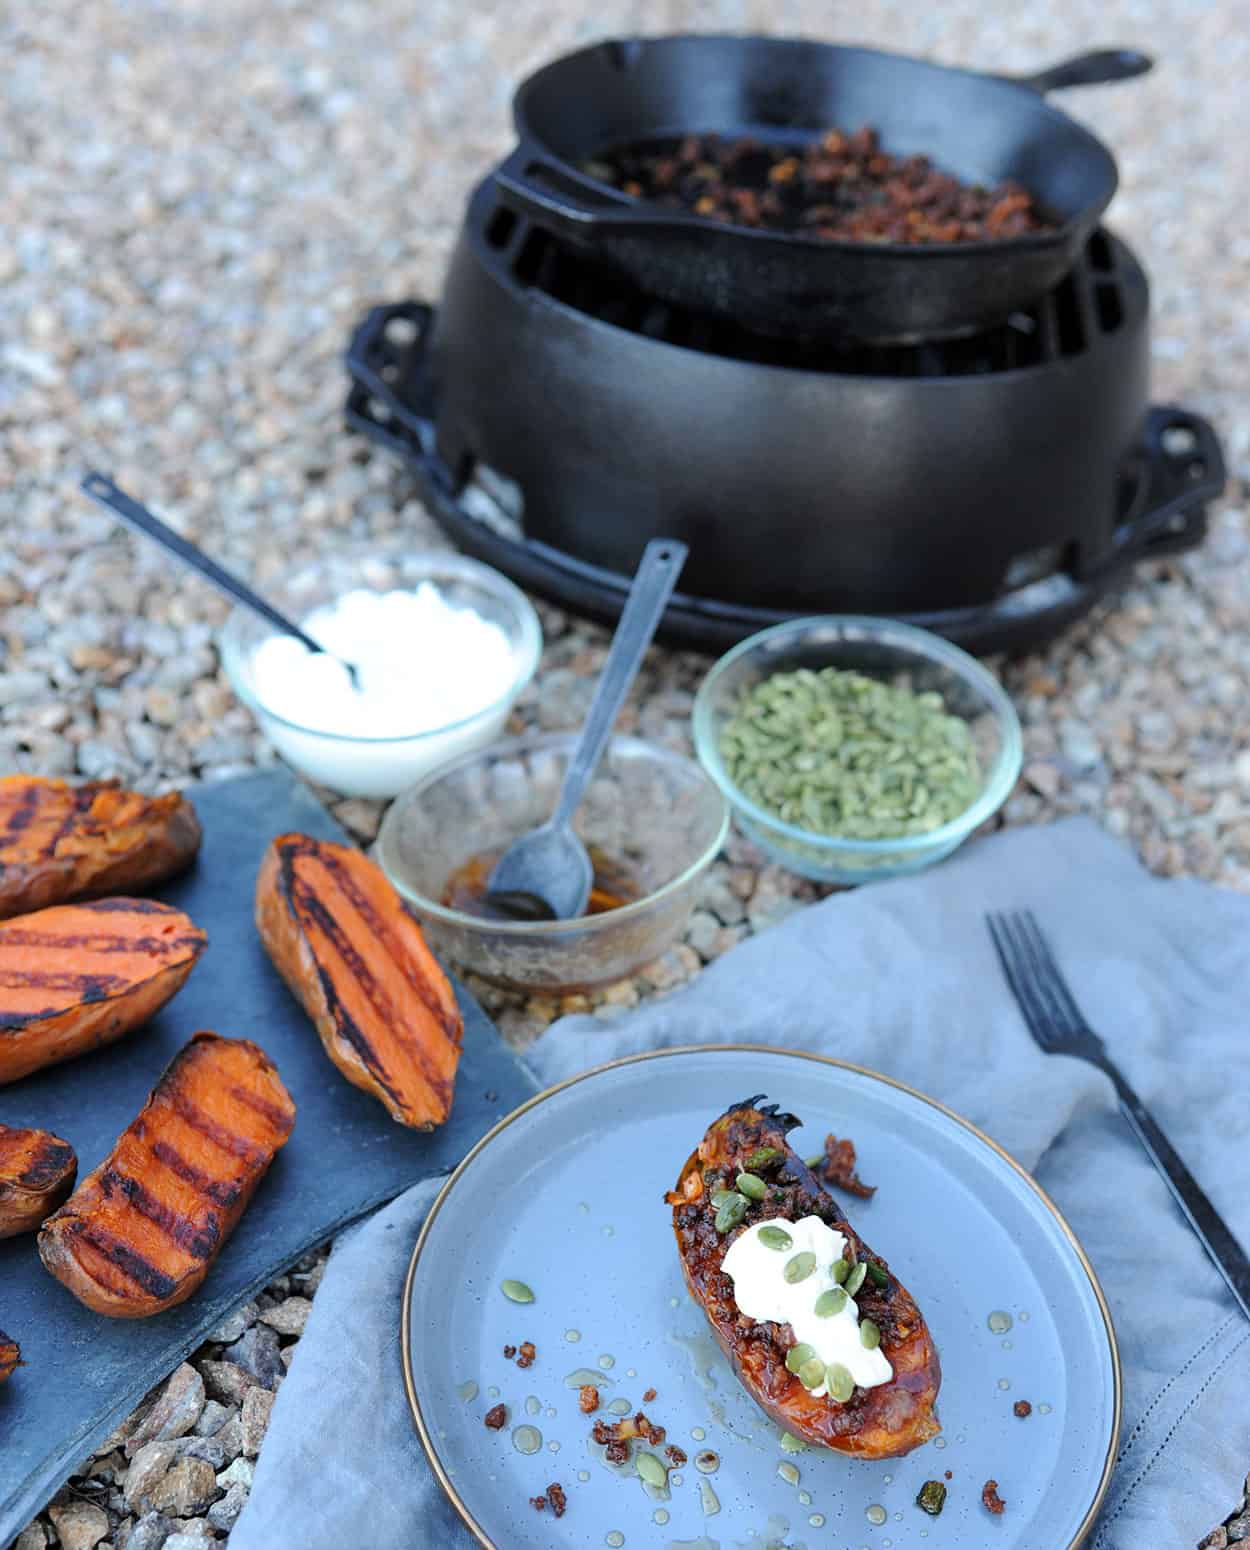 grilled sweet potatoes by Lodge kickoff grill.